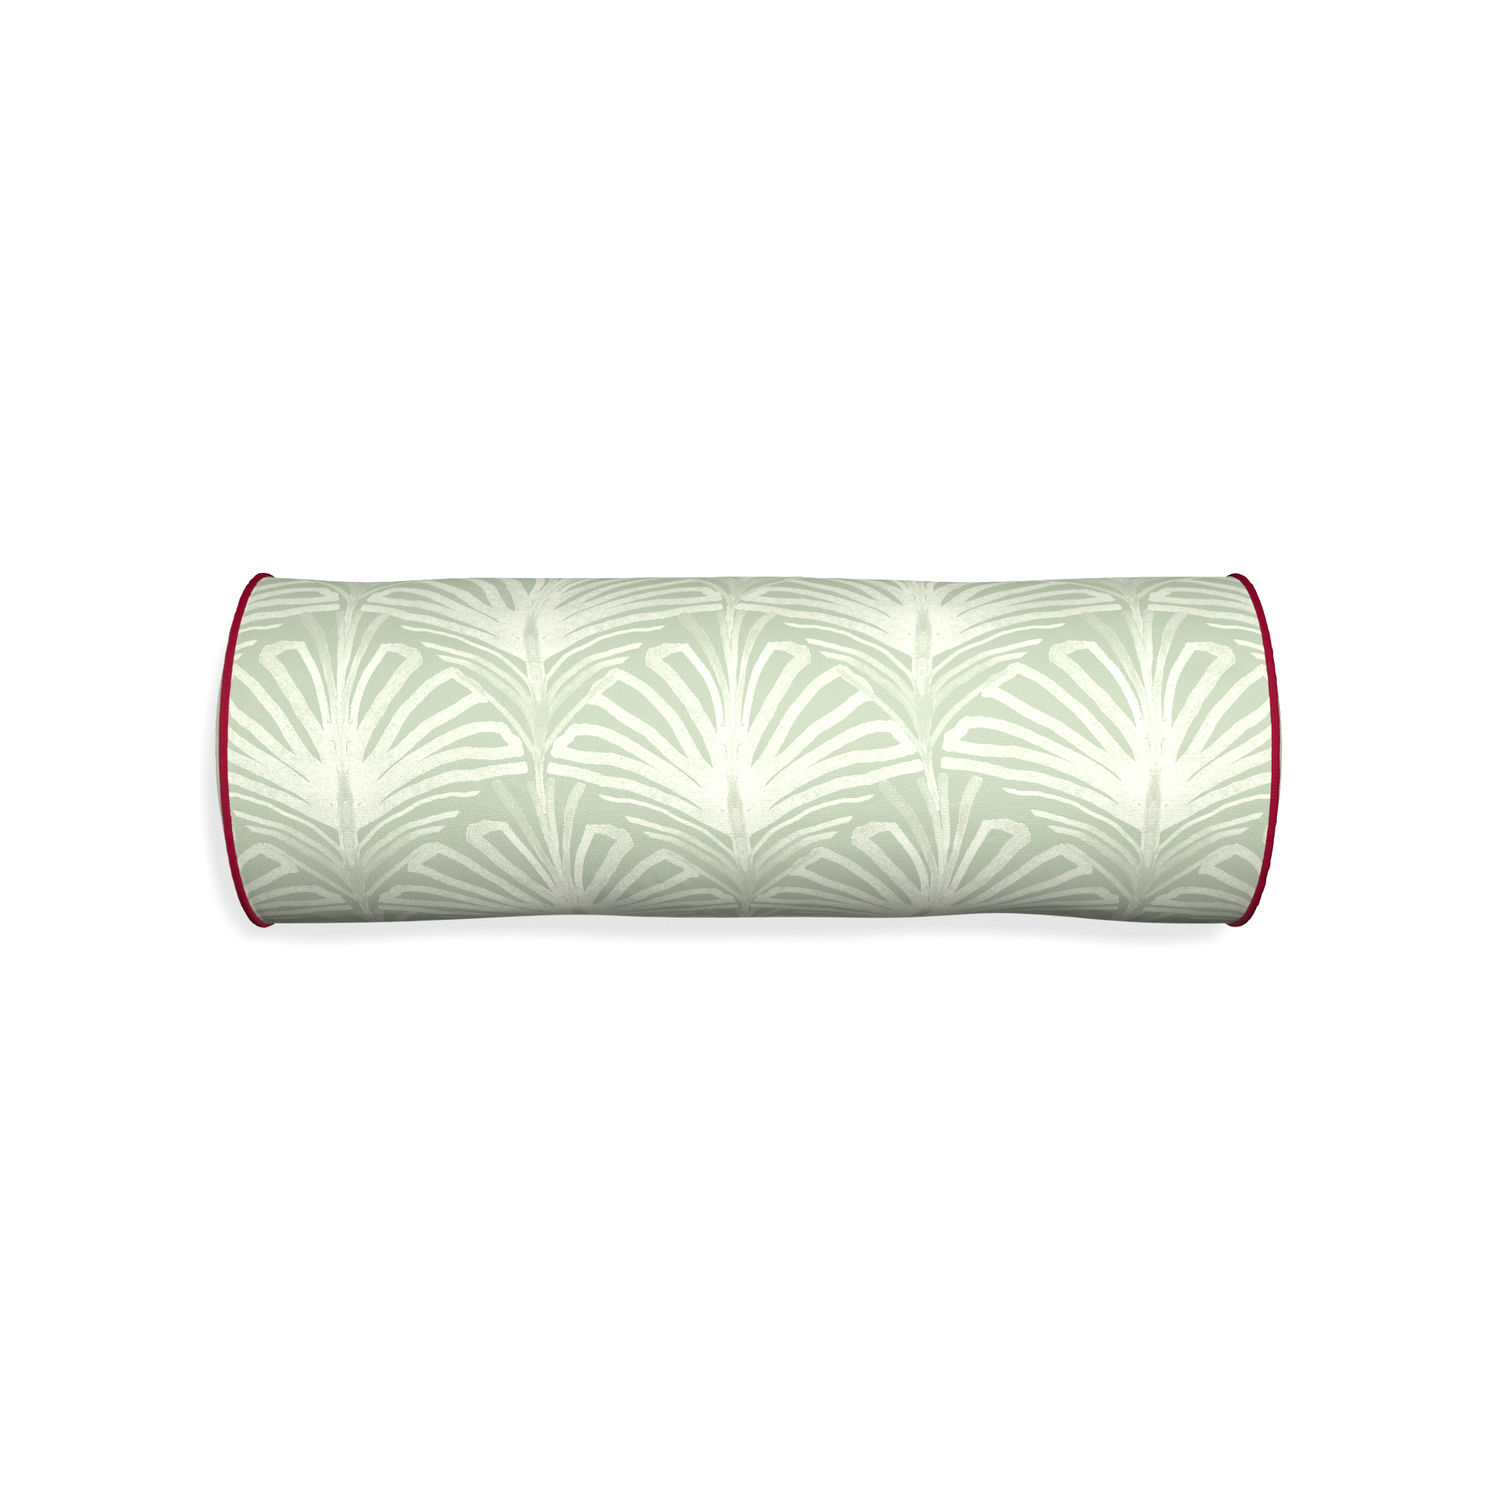 Bolster suzy sage custom pillow with raspberry piping on white background